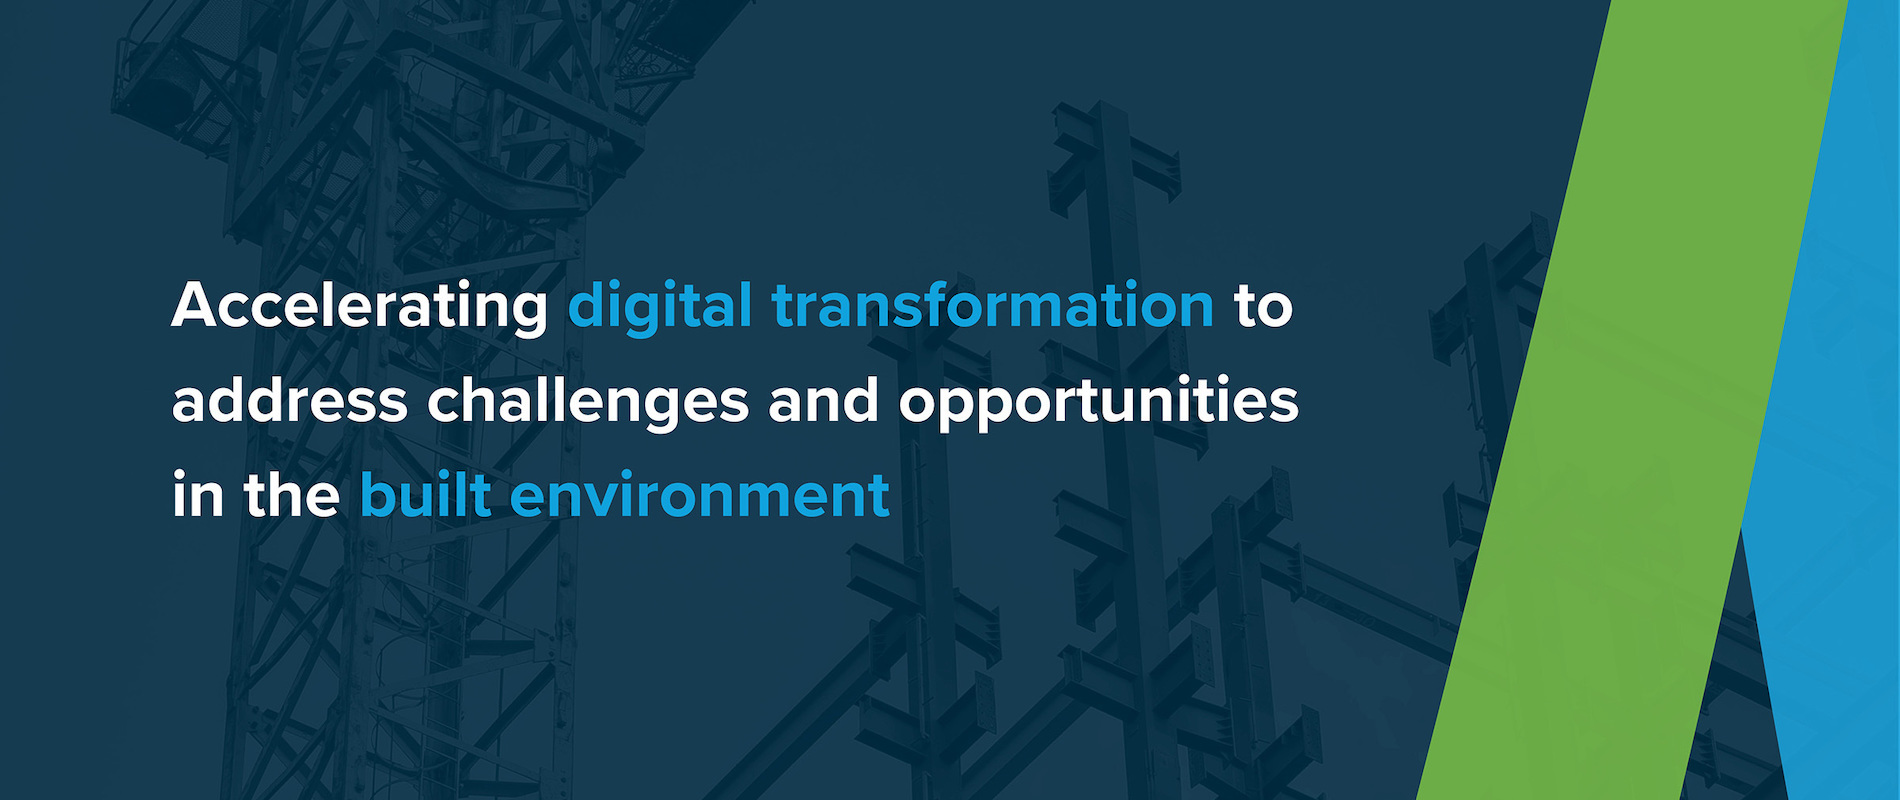 Accelerating digital transformation to address changes and challenges in the built environment